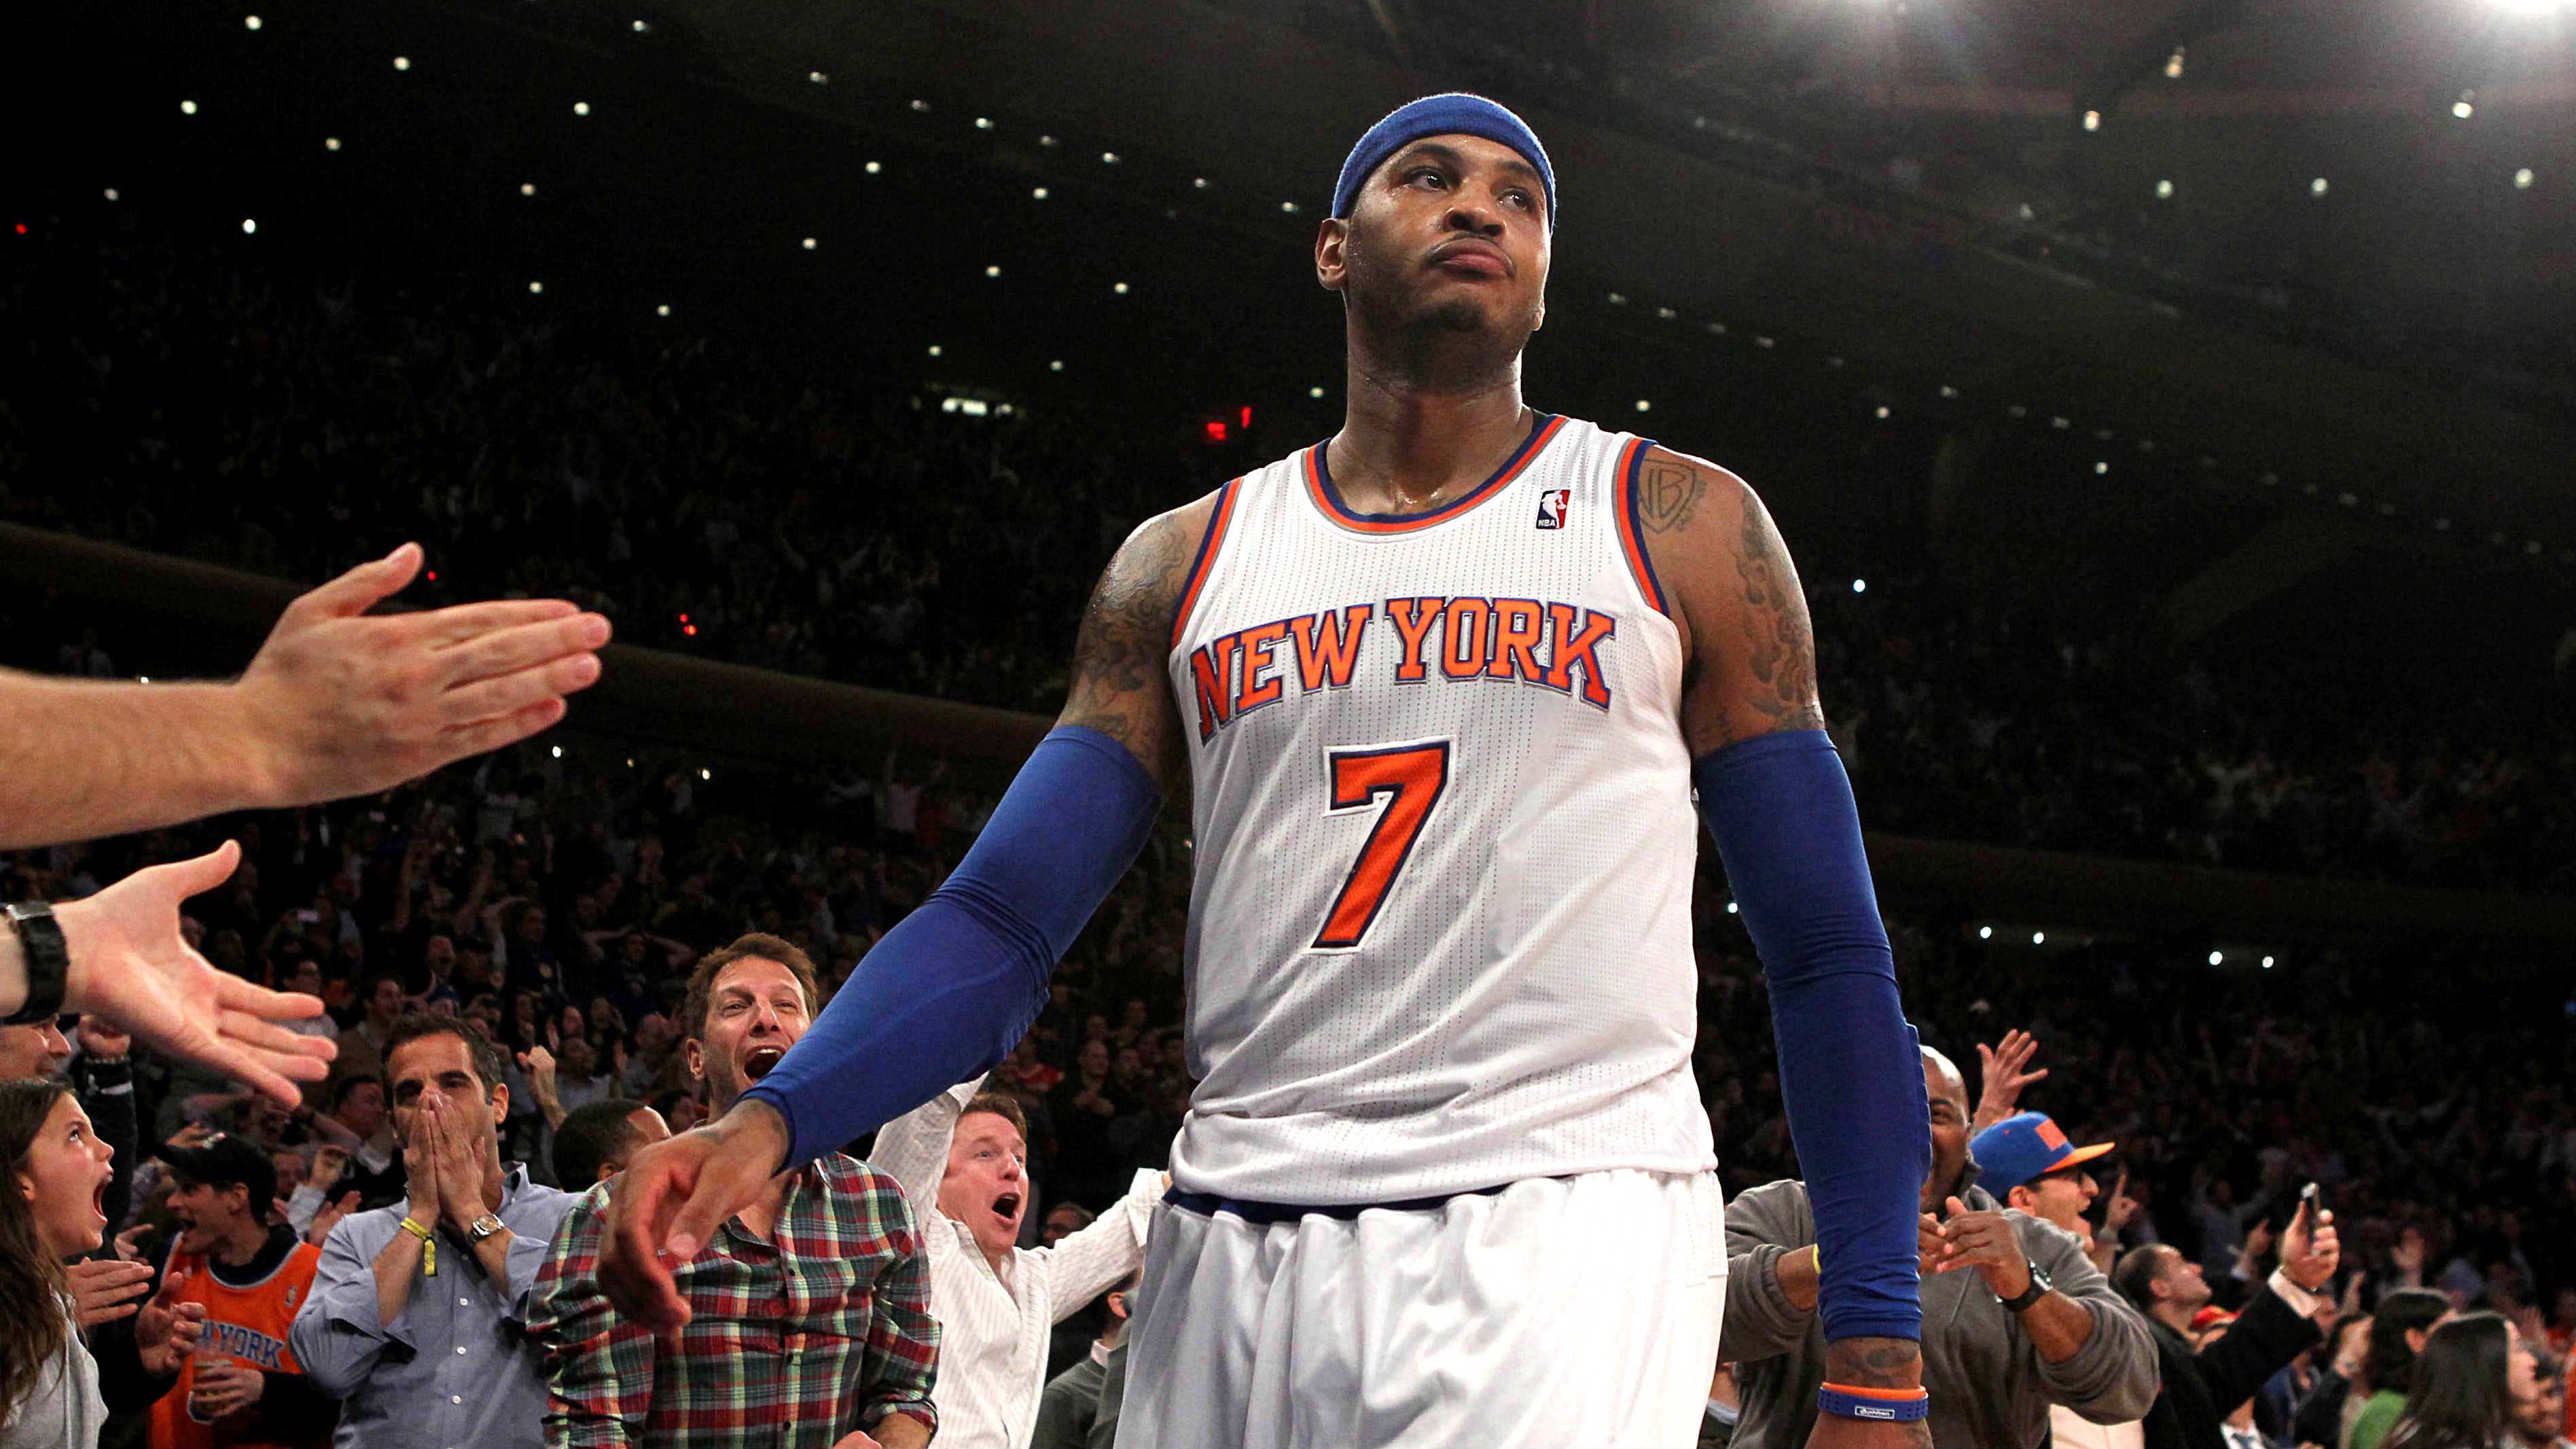 carmelo anthony wallpaper hd,basketball player,basketball moves,sports,product,player